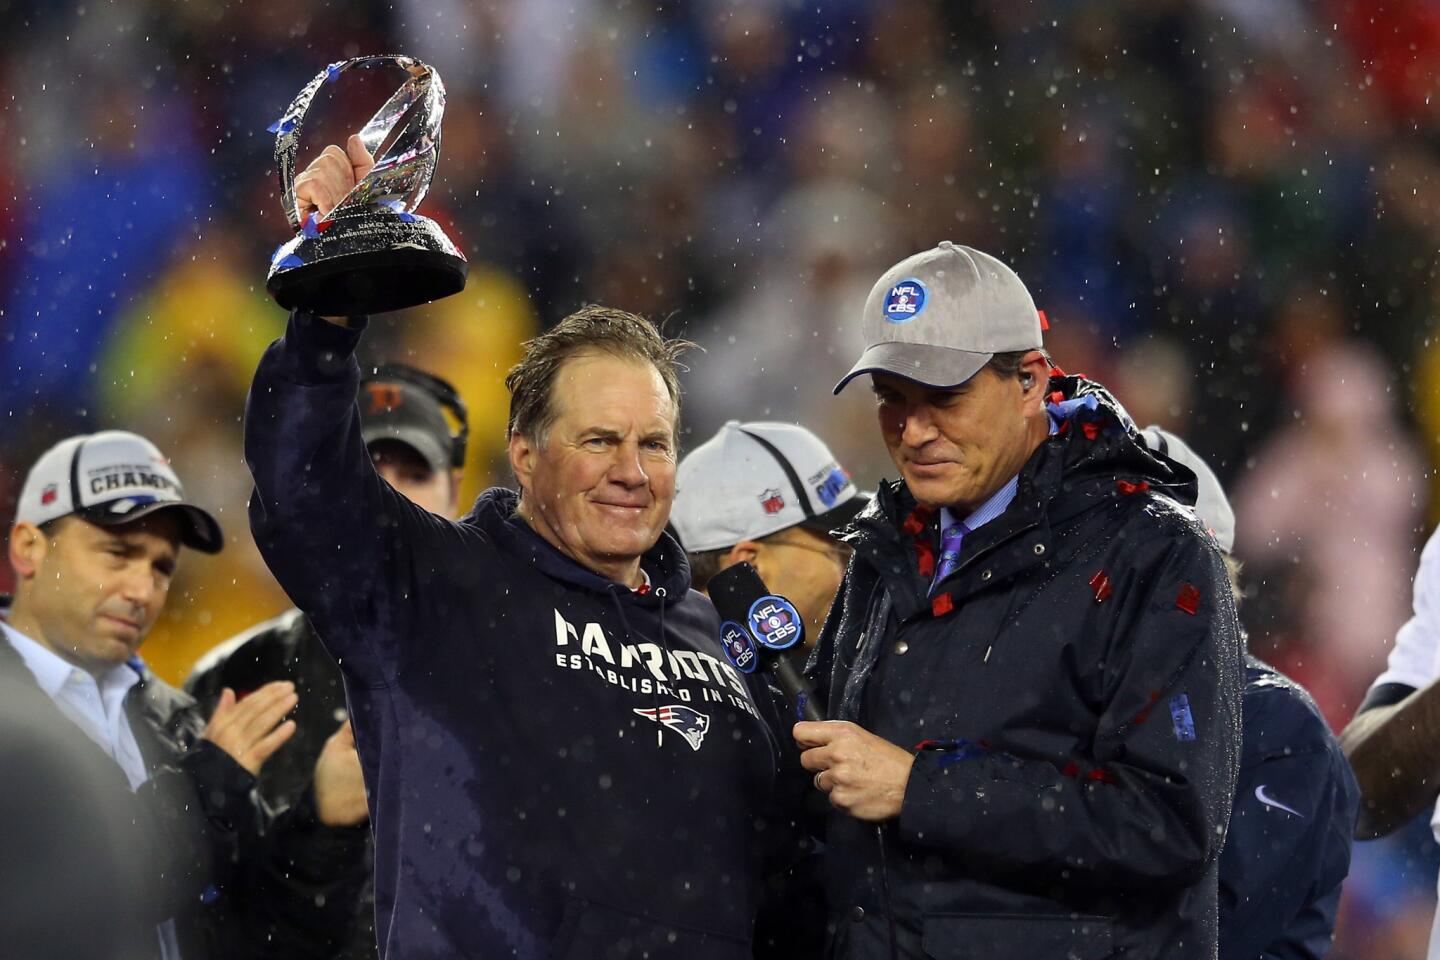 Patriots Coach Bill Belichick raises the Lamar Hunt Trophy after leading New England to a 45-7 victory over the Indianapolis Colts in the AFC championship game on Sunday in Foxborough, Mass.